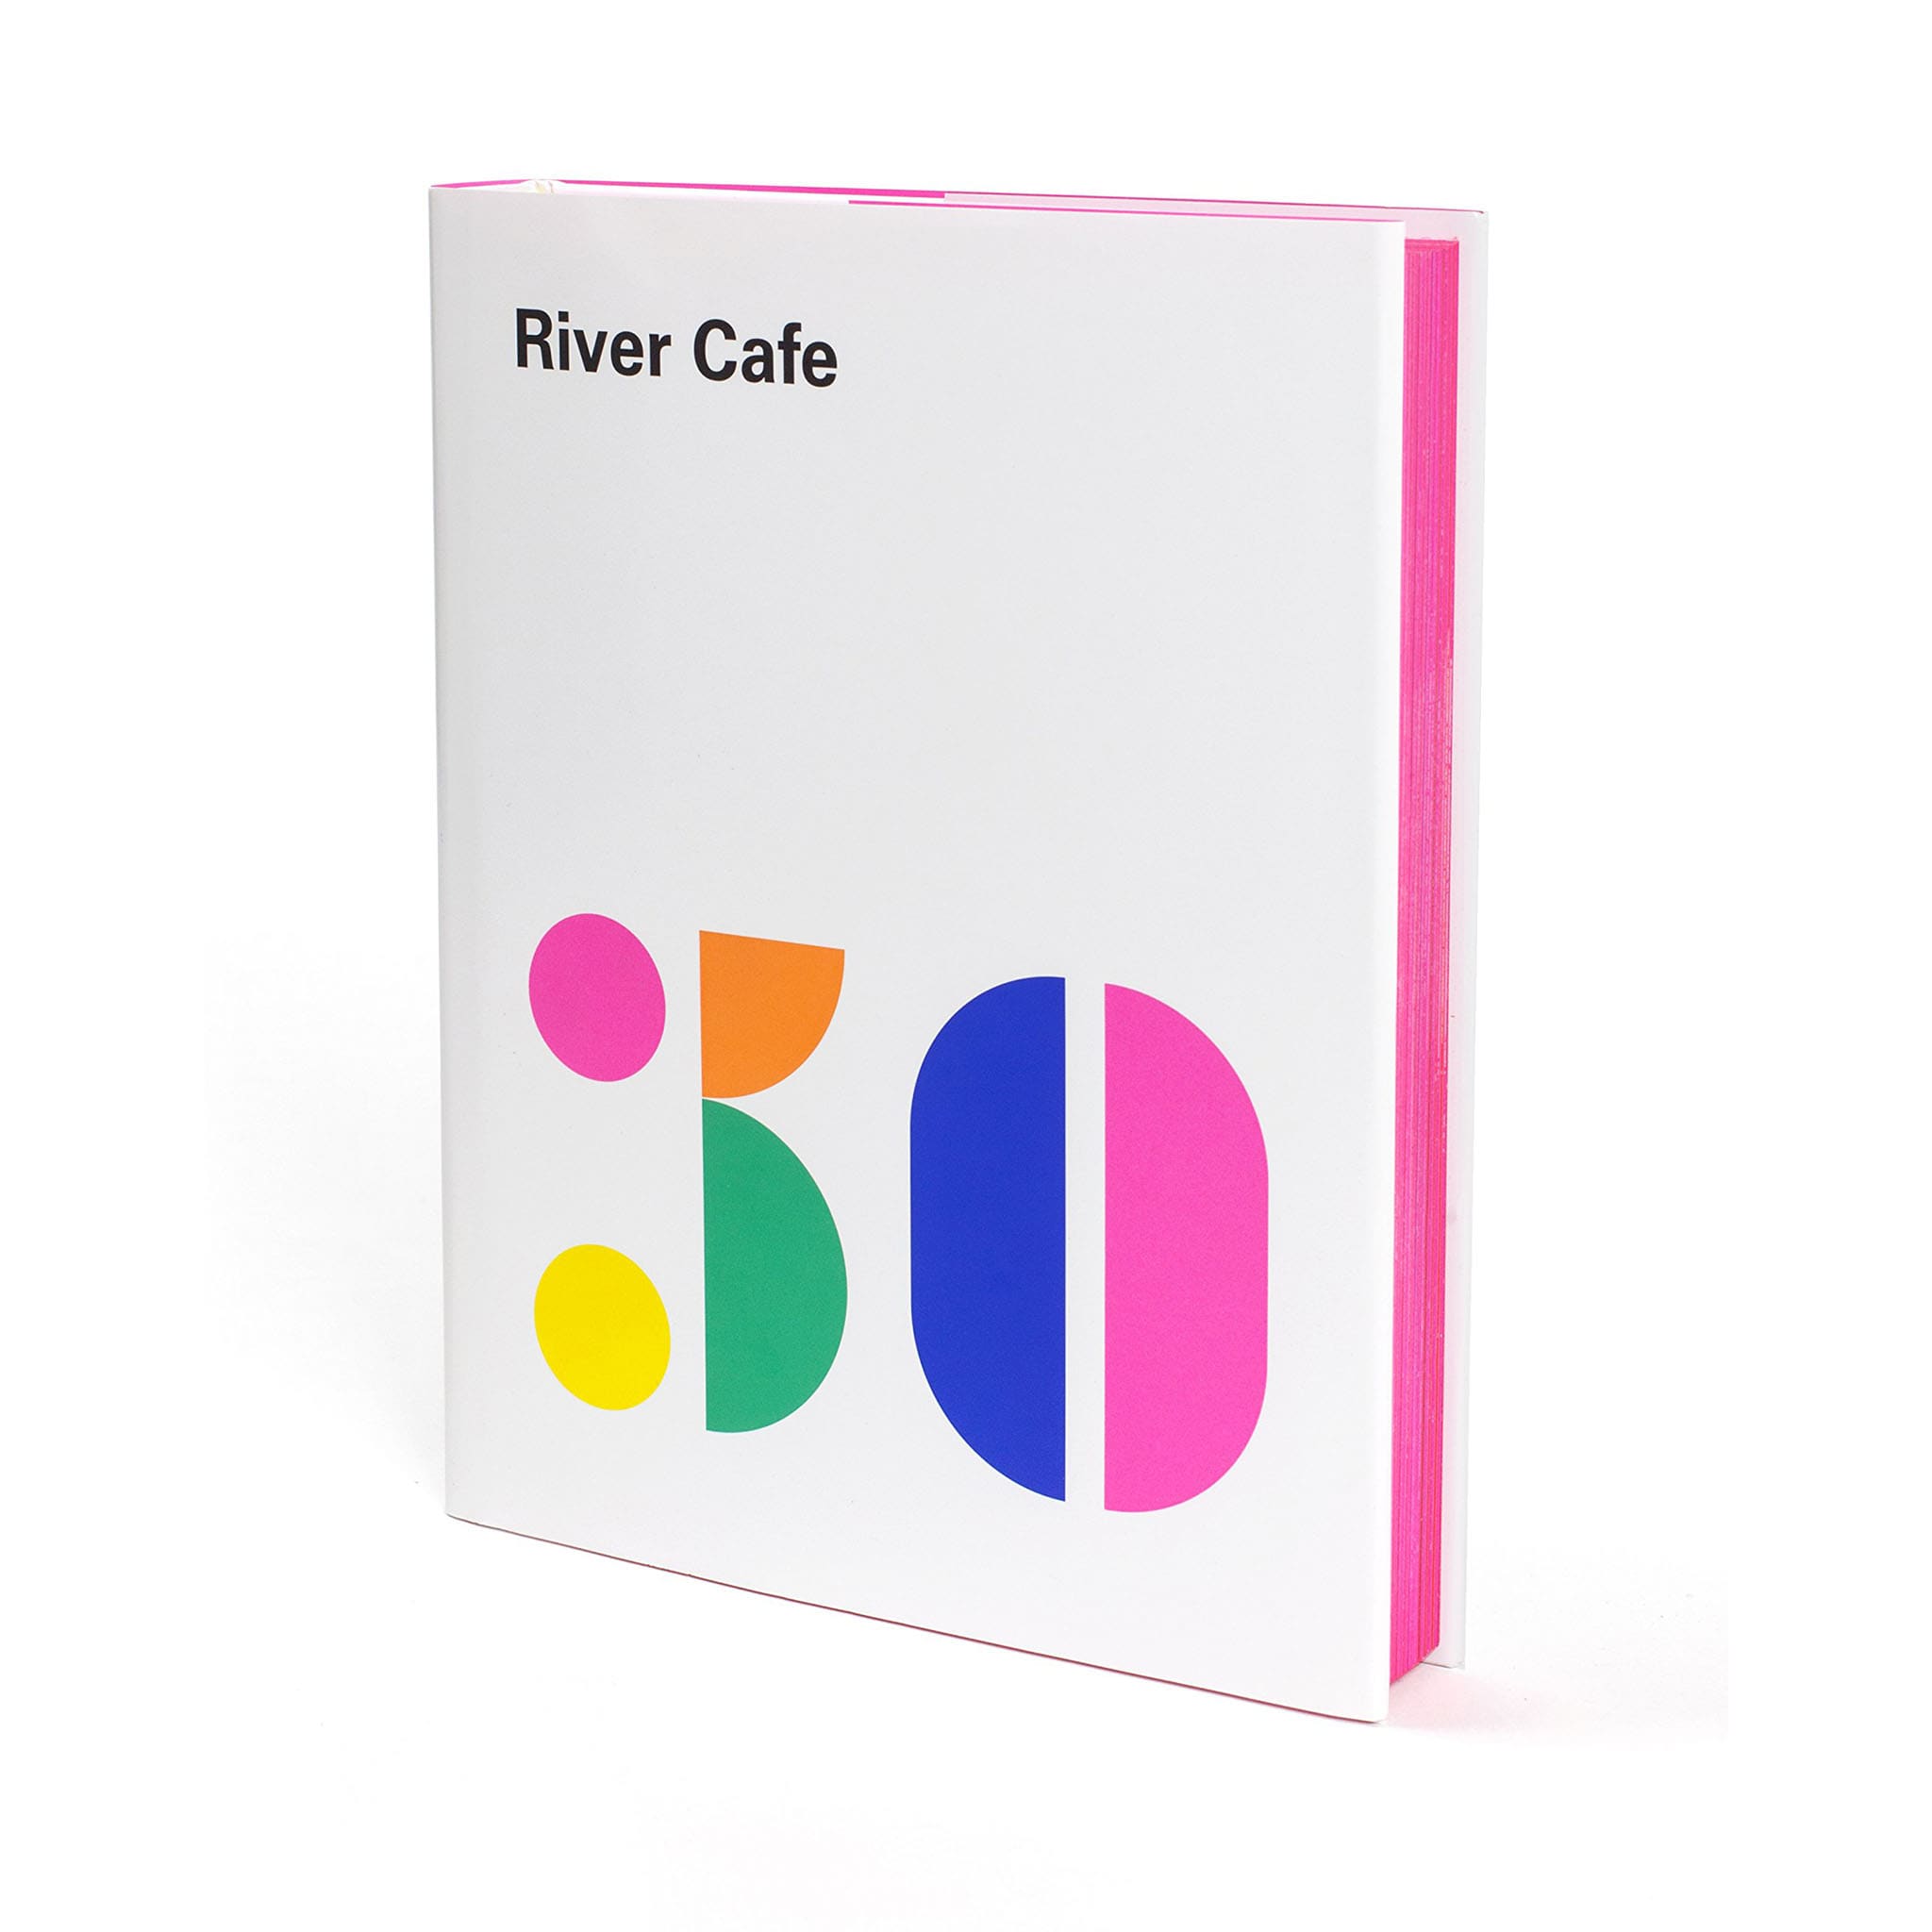 River Cafe 30: Simple Italian Recipes from an Iconic Restaurant book cover